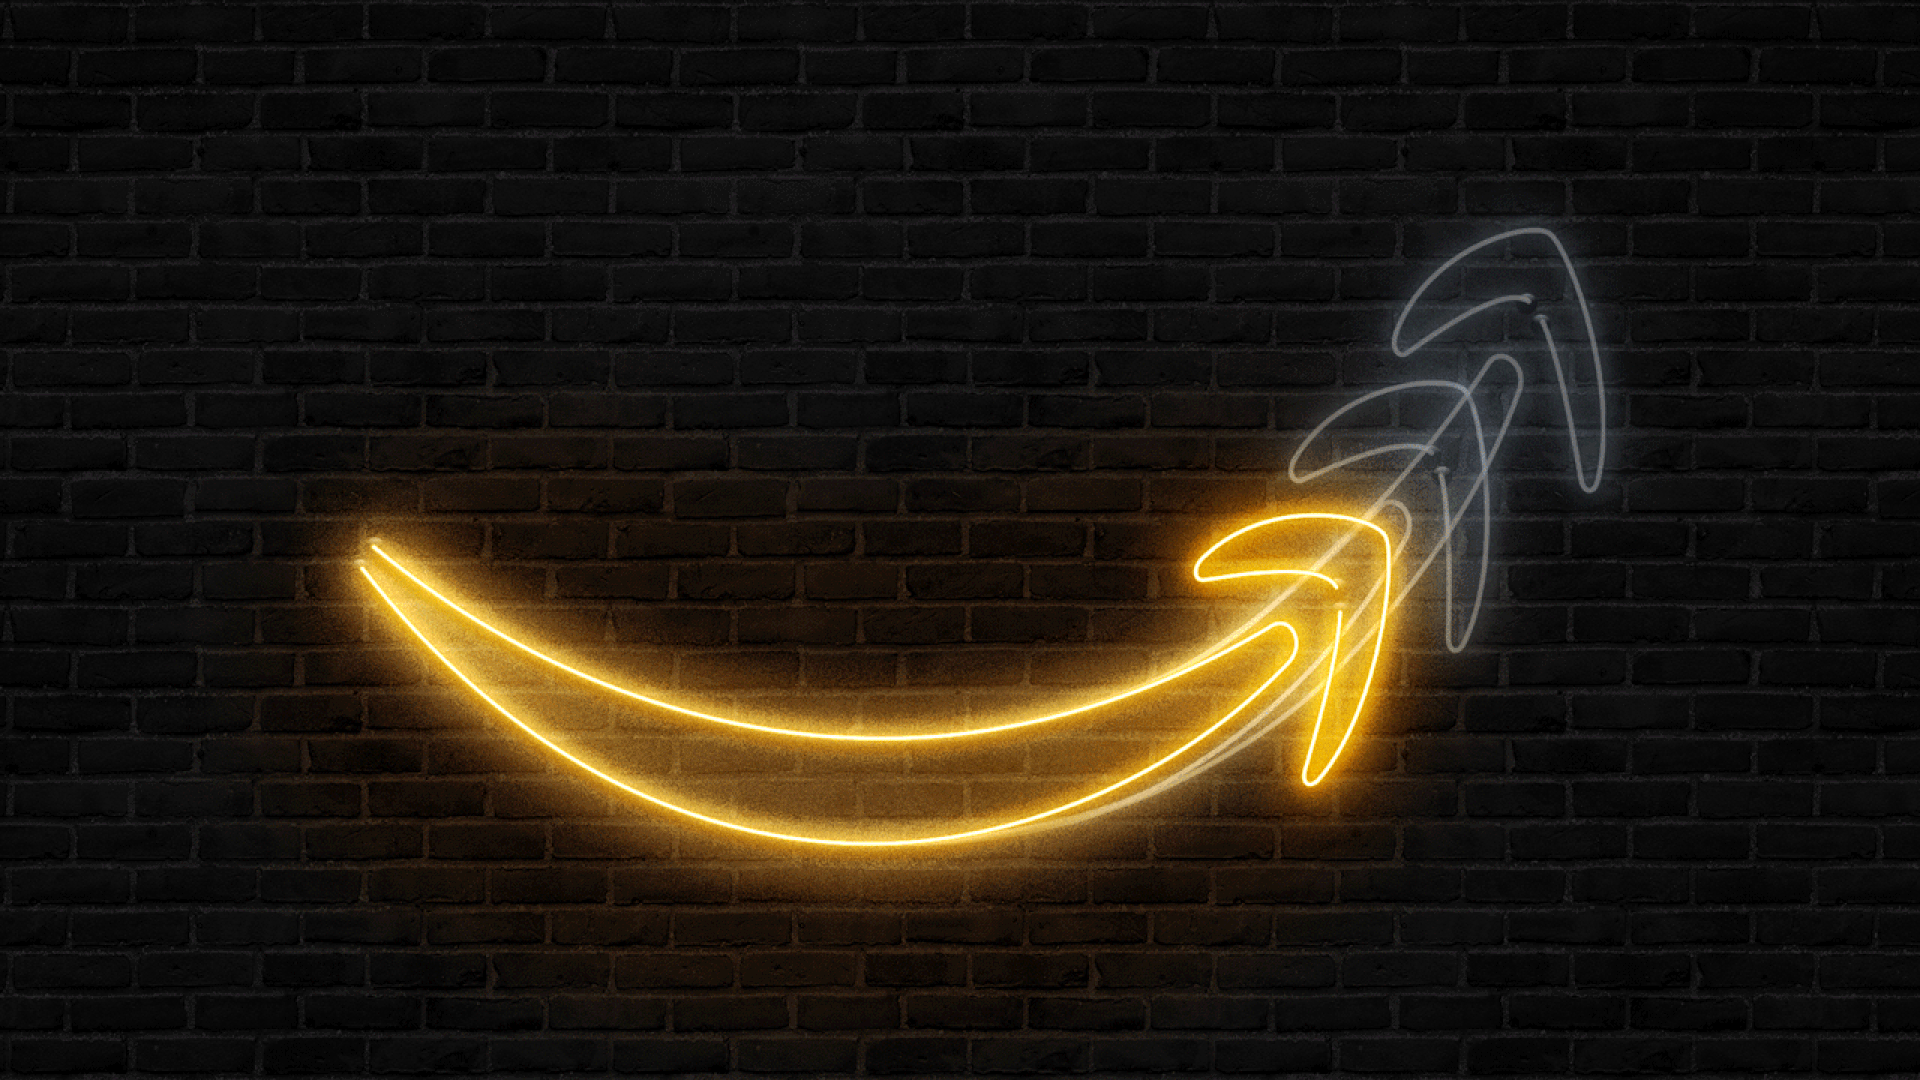 Animated illustration of a neon sign with the Amazon smile growing larger